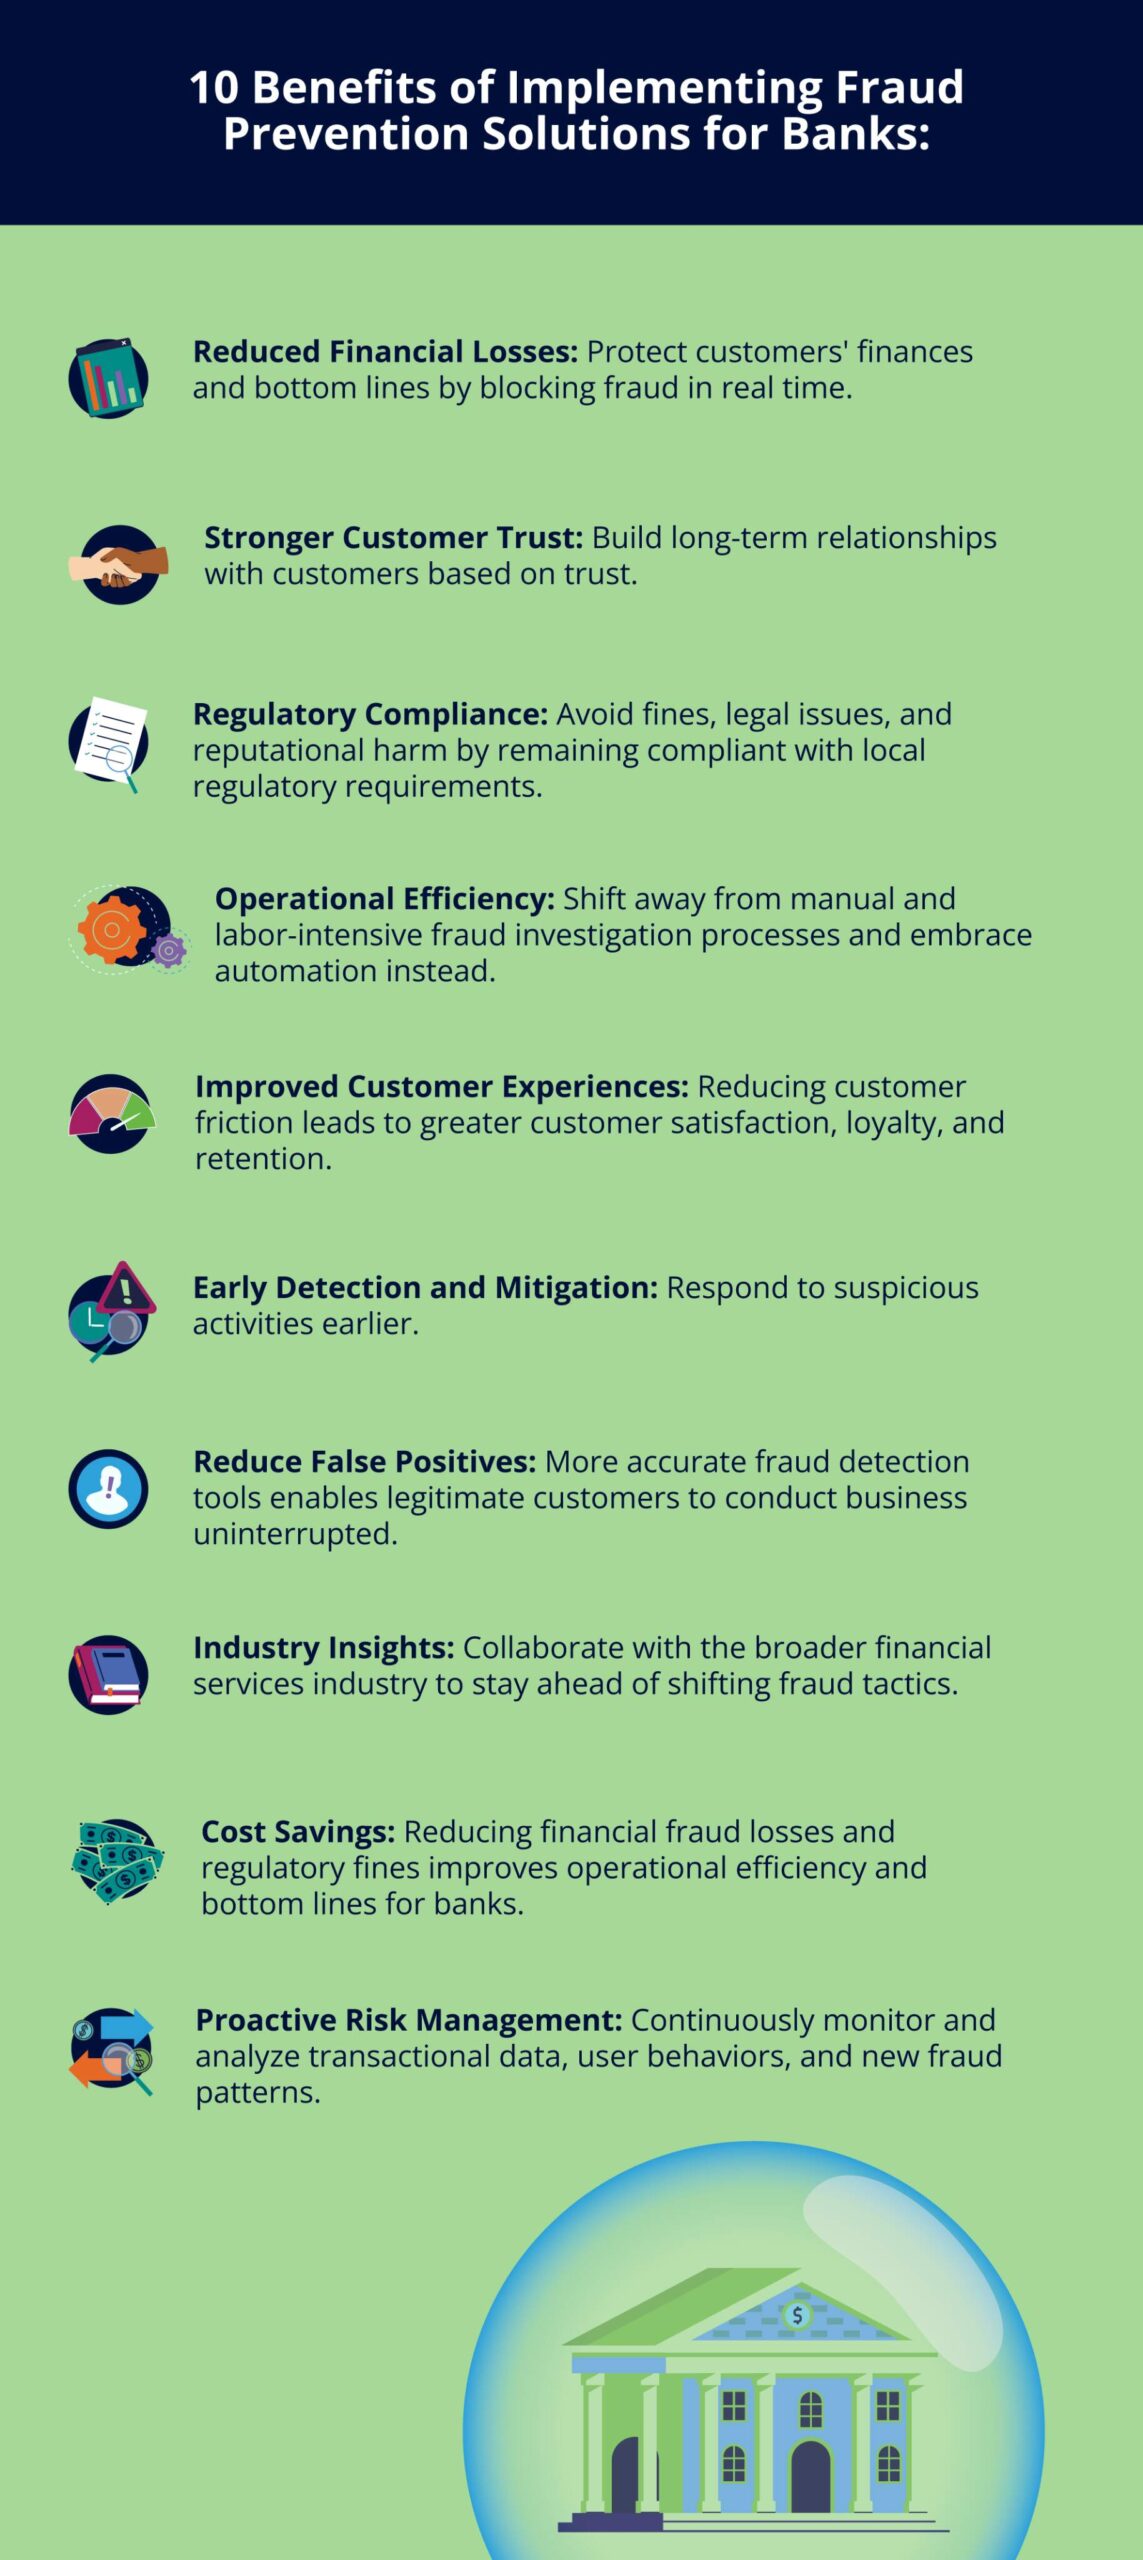 Infographic showing 10 Benefits of implementing fraud prevention solutions for banks